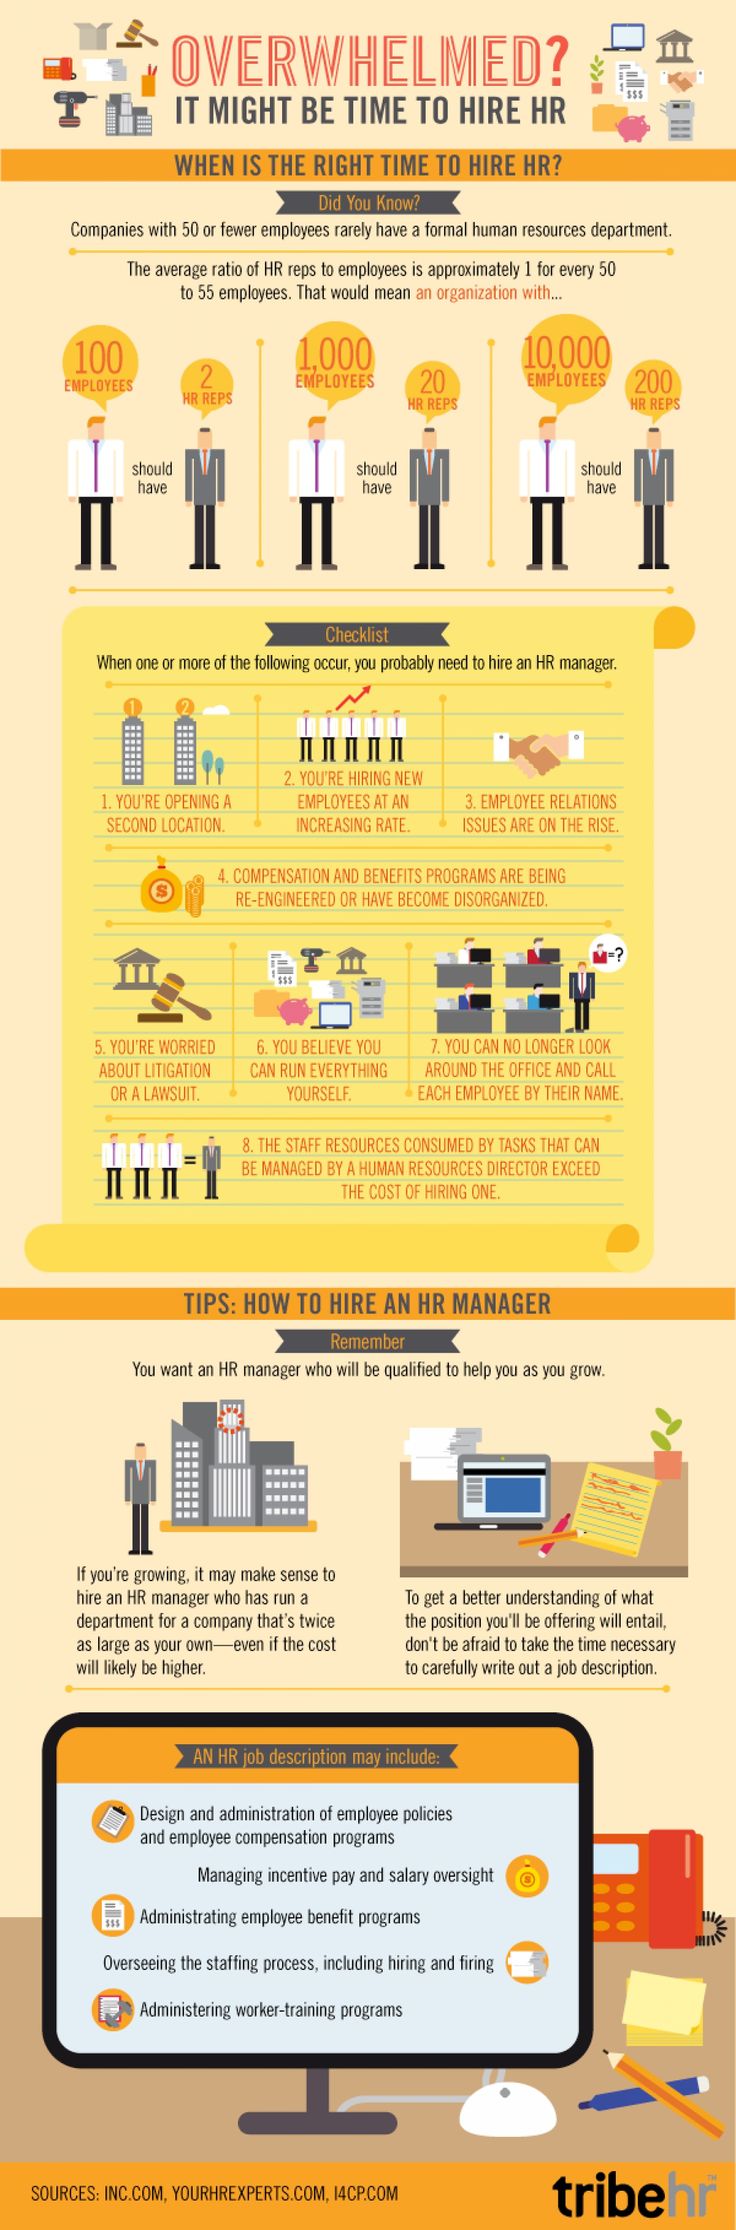 management-when-to-hire-an-hr-manager-infographic-infographicnow-your-number-one